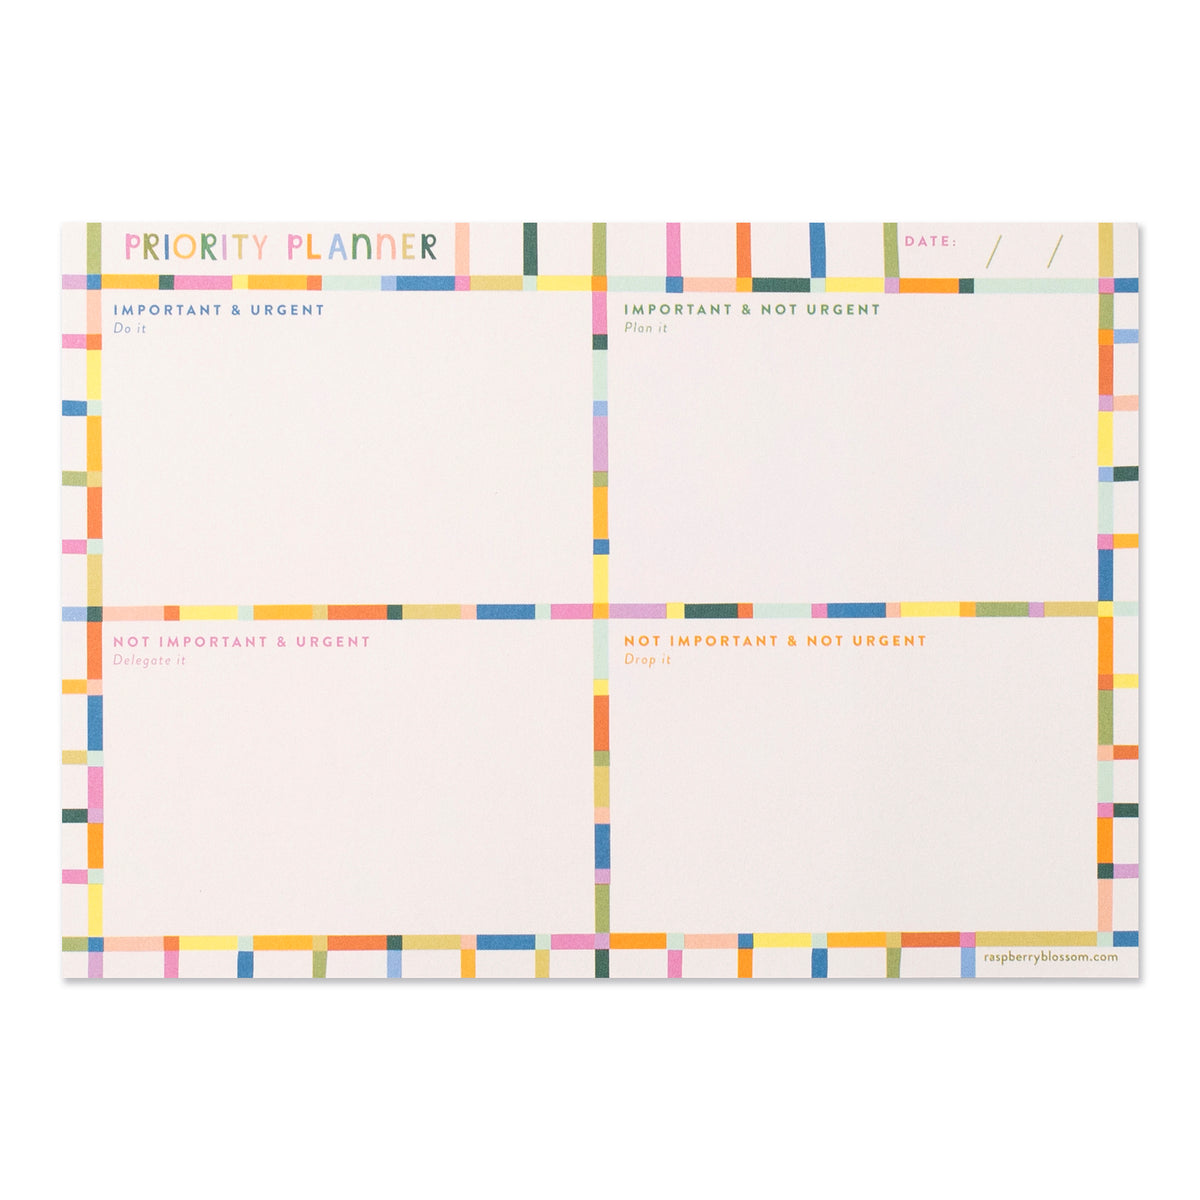 A cream coloured rectangular notepad with the title &#39;Priority Planner&#39;. It has an outline colourful grid pattern that helps break down the notepad into 4 blocks as follows: Important &amp; Urgent, Important &amp; Not Urgent, Not Important &amp; Urgent, Not Important &amp; Not Urgent.